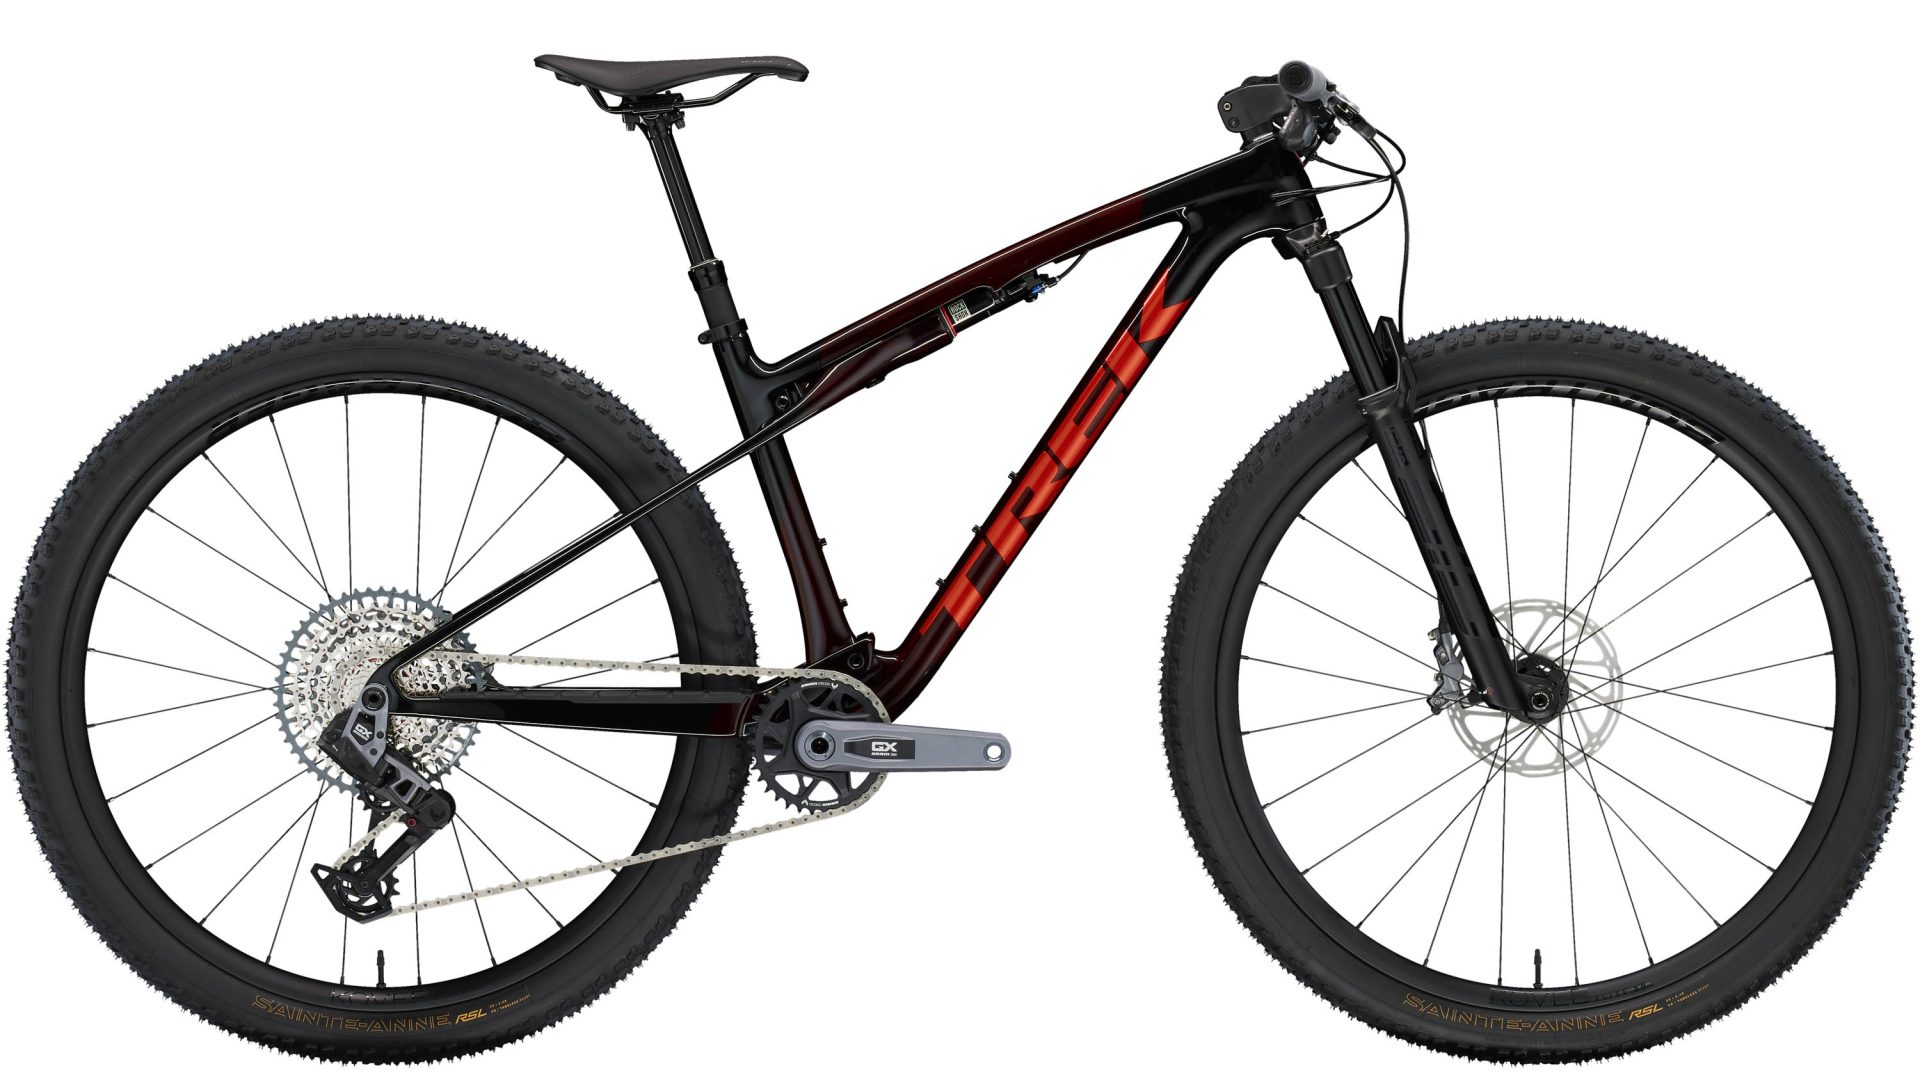 The Supercaliber SLR 9.8 GX AXS gets SRAM's recently introduced GX Transmission groupset, plus a RockShox SID RL fork, Bontrager Kovee Elite 30 carbon wheels, and a Bontrager Line dropper. Claimed weight is 11.28 kg (24.9 lb), and retail price is US$7,350. 